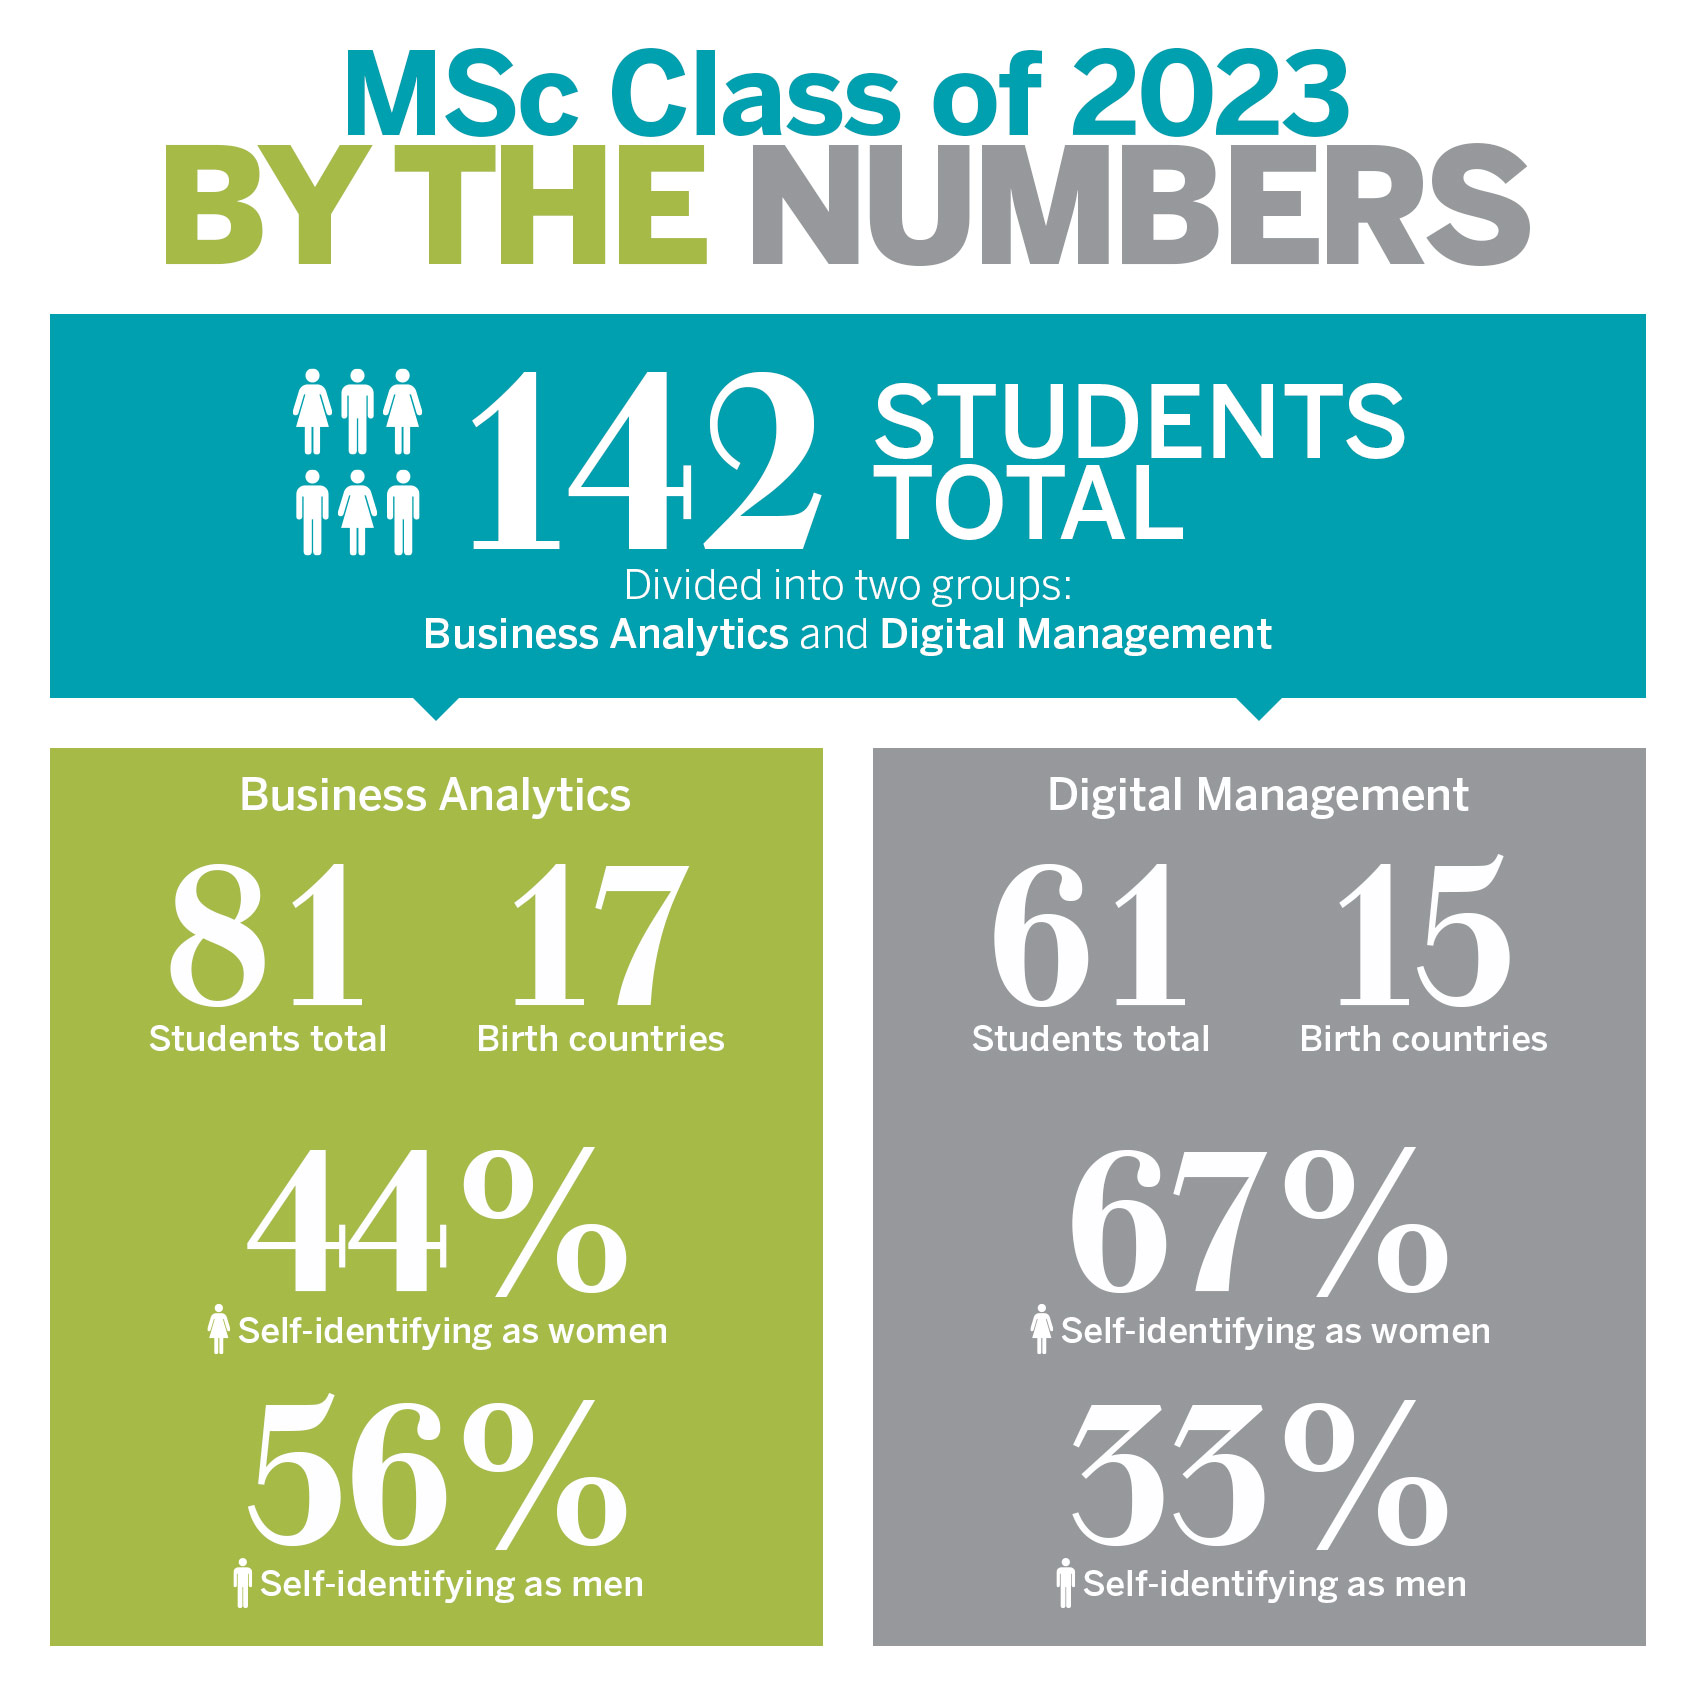 MSc Class of 2023 By the Numbers